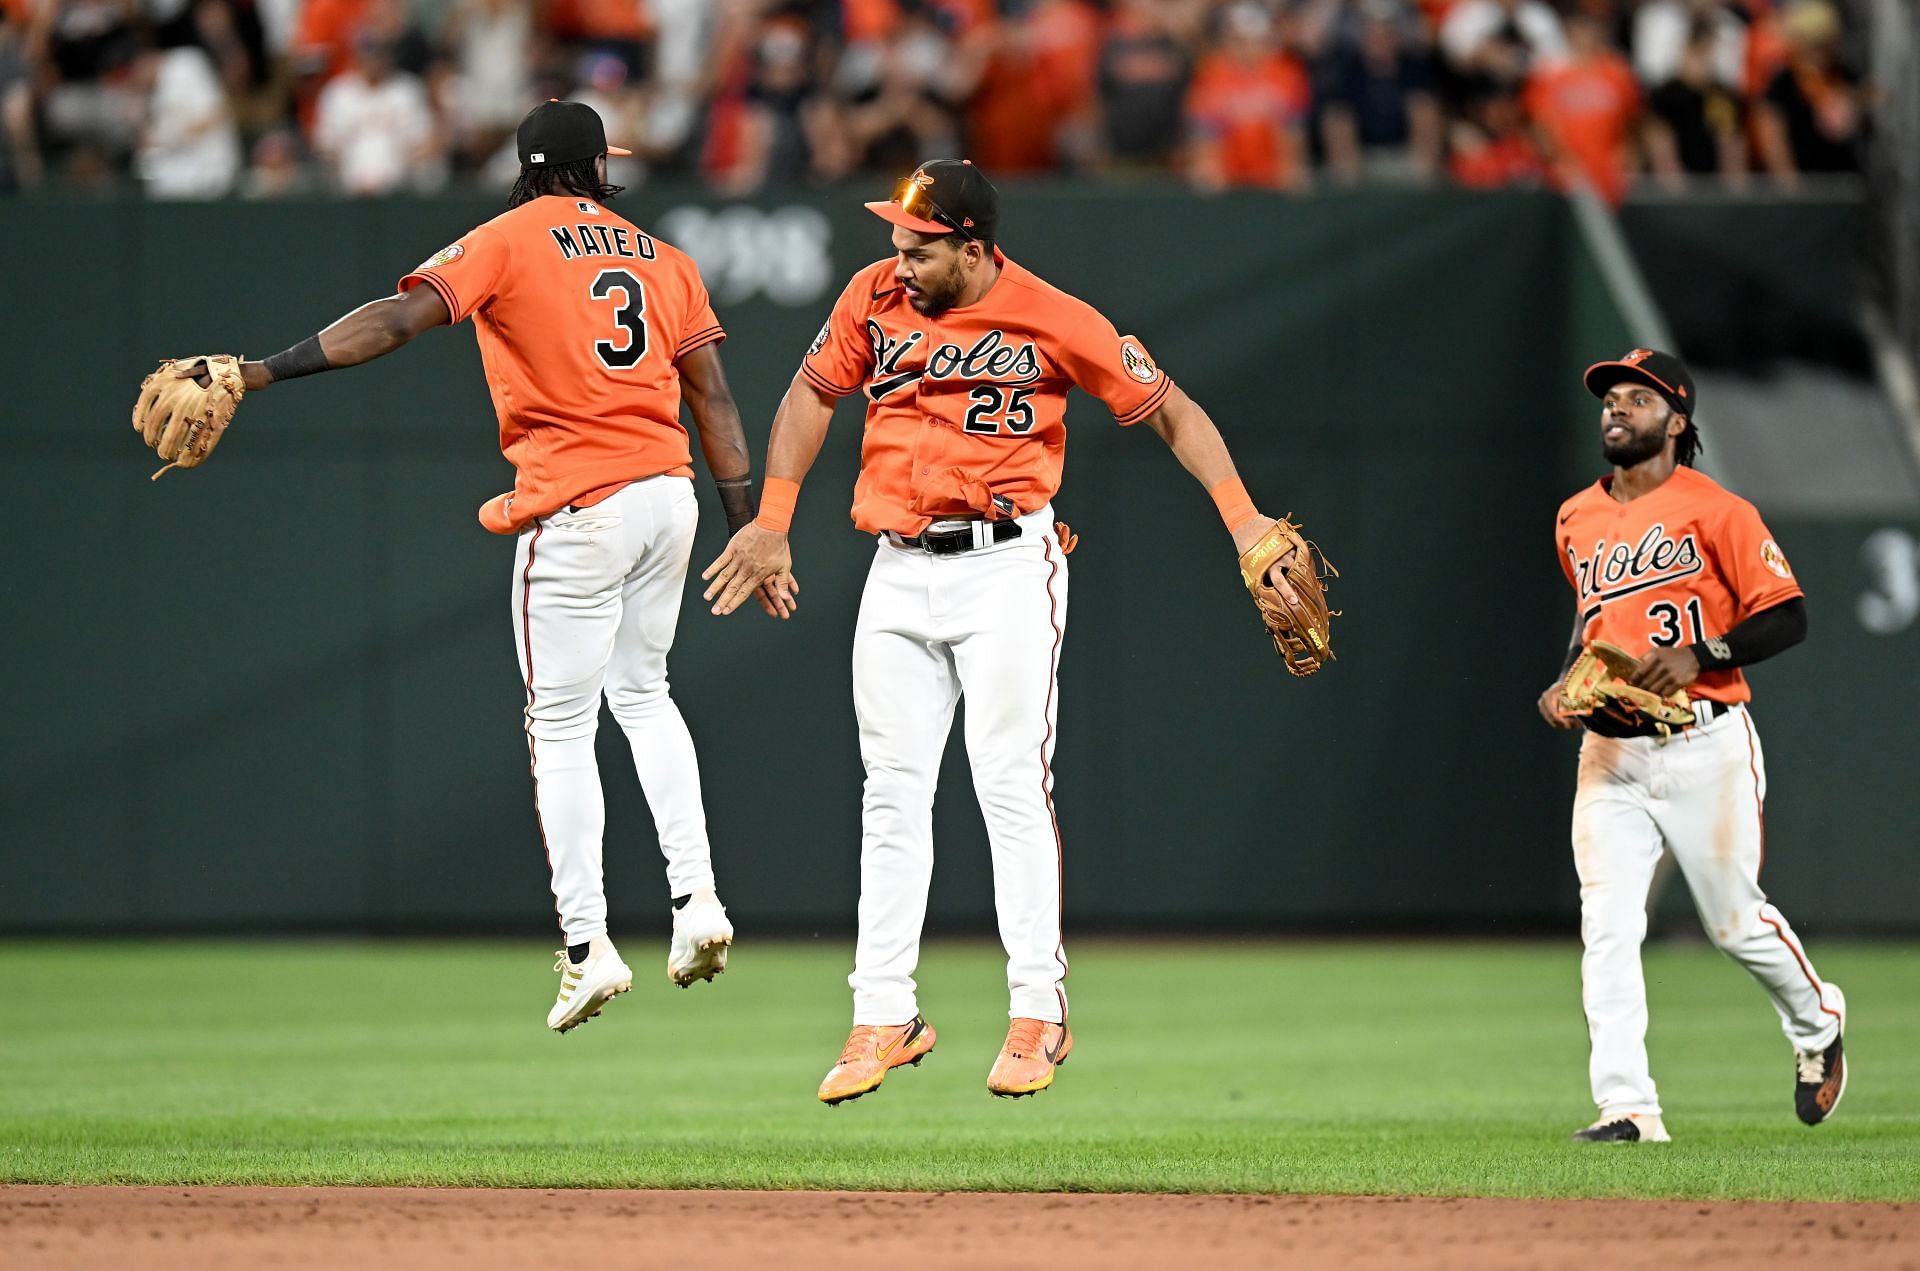 The Baltimore Orioles would be in 1st place in the AL Central